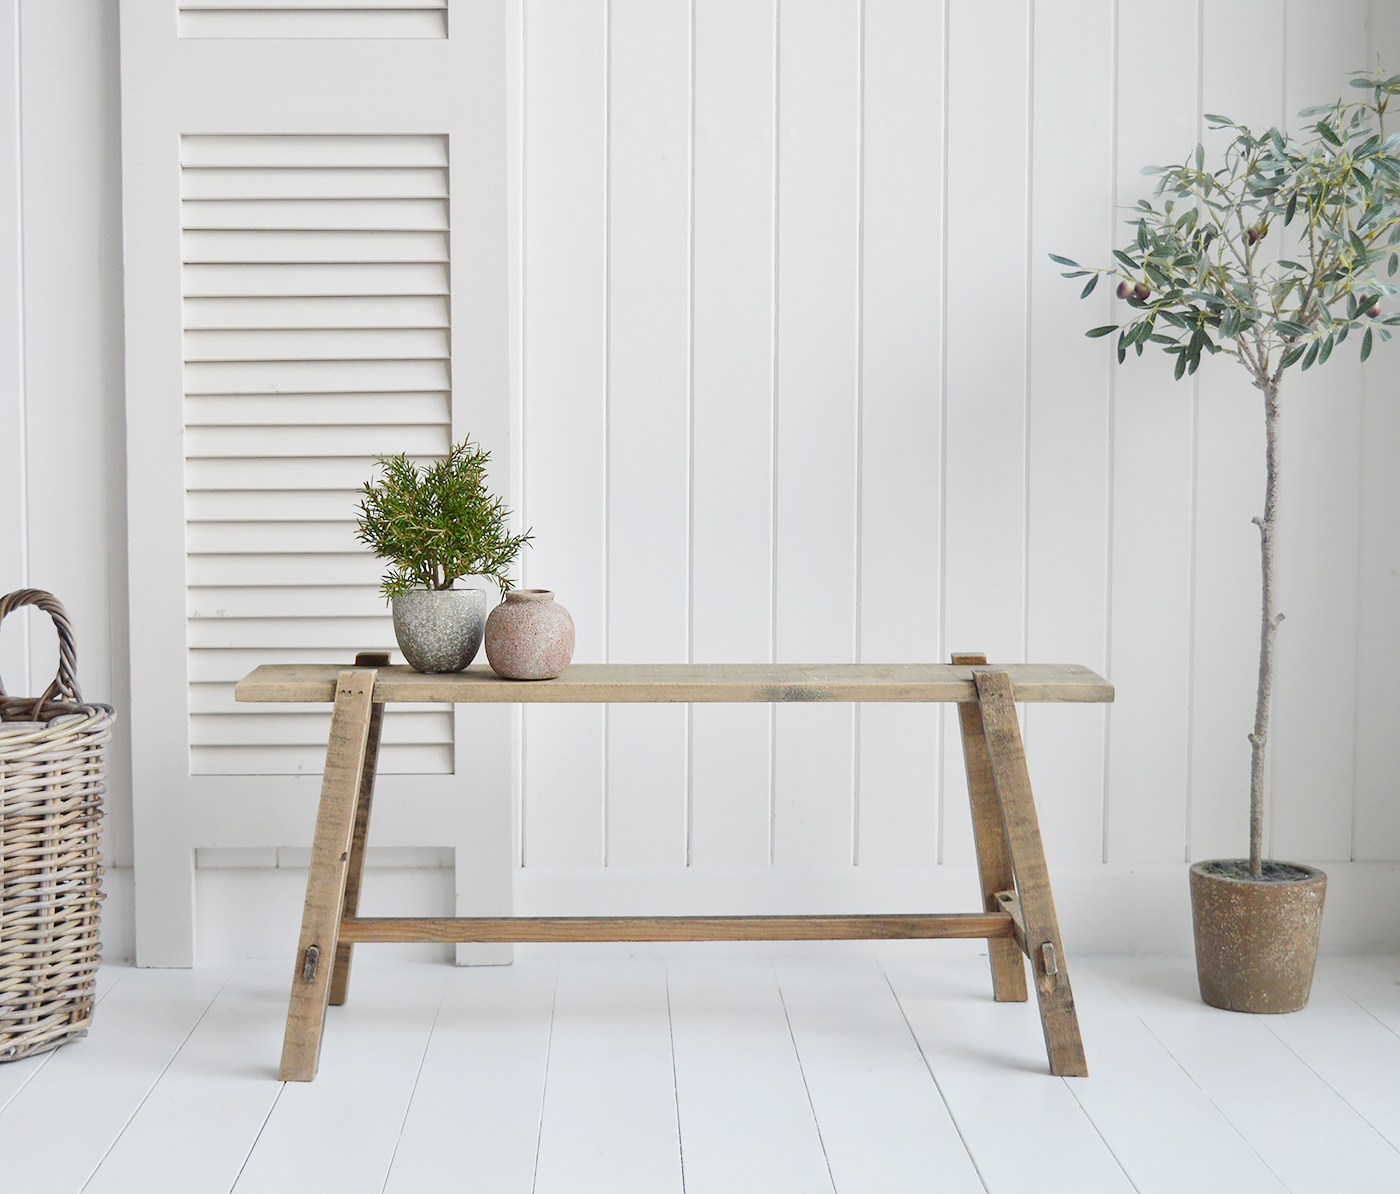 Pawtucket Grey Small Rustic Bench - Coastal, New England, Modern Farmhouse and Country Furniture